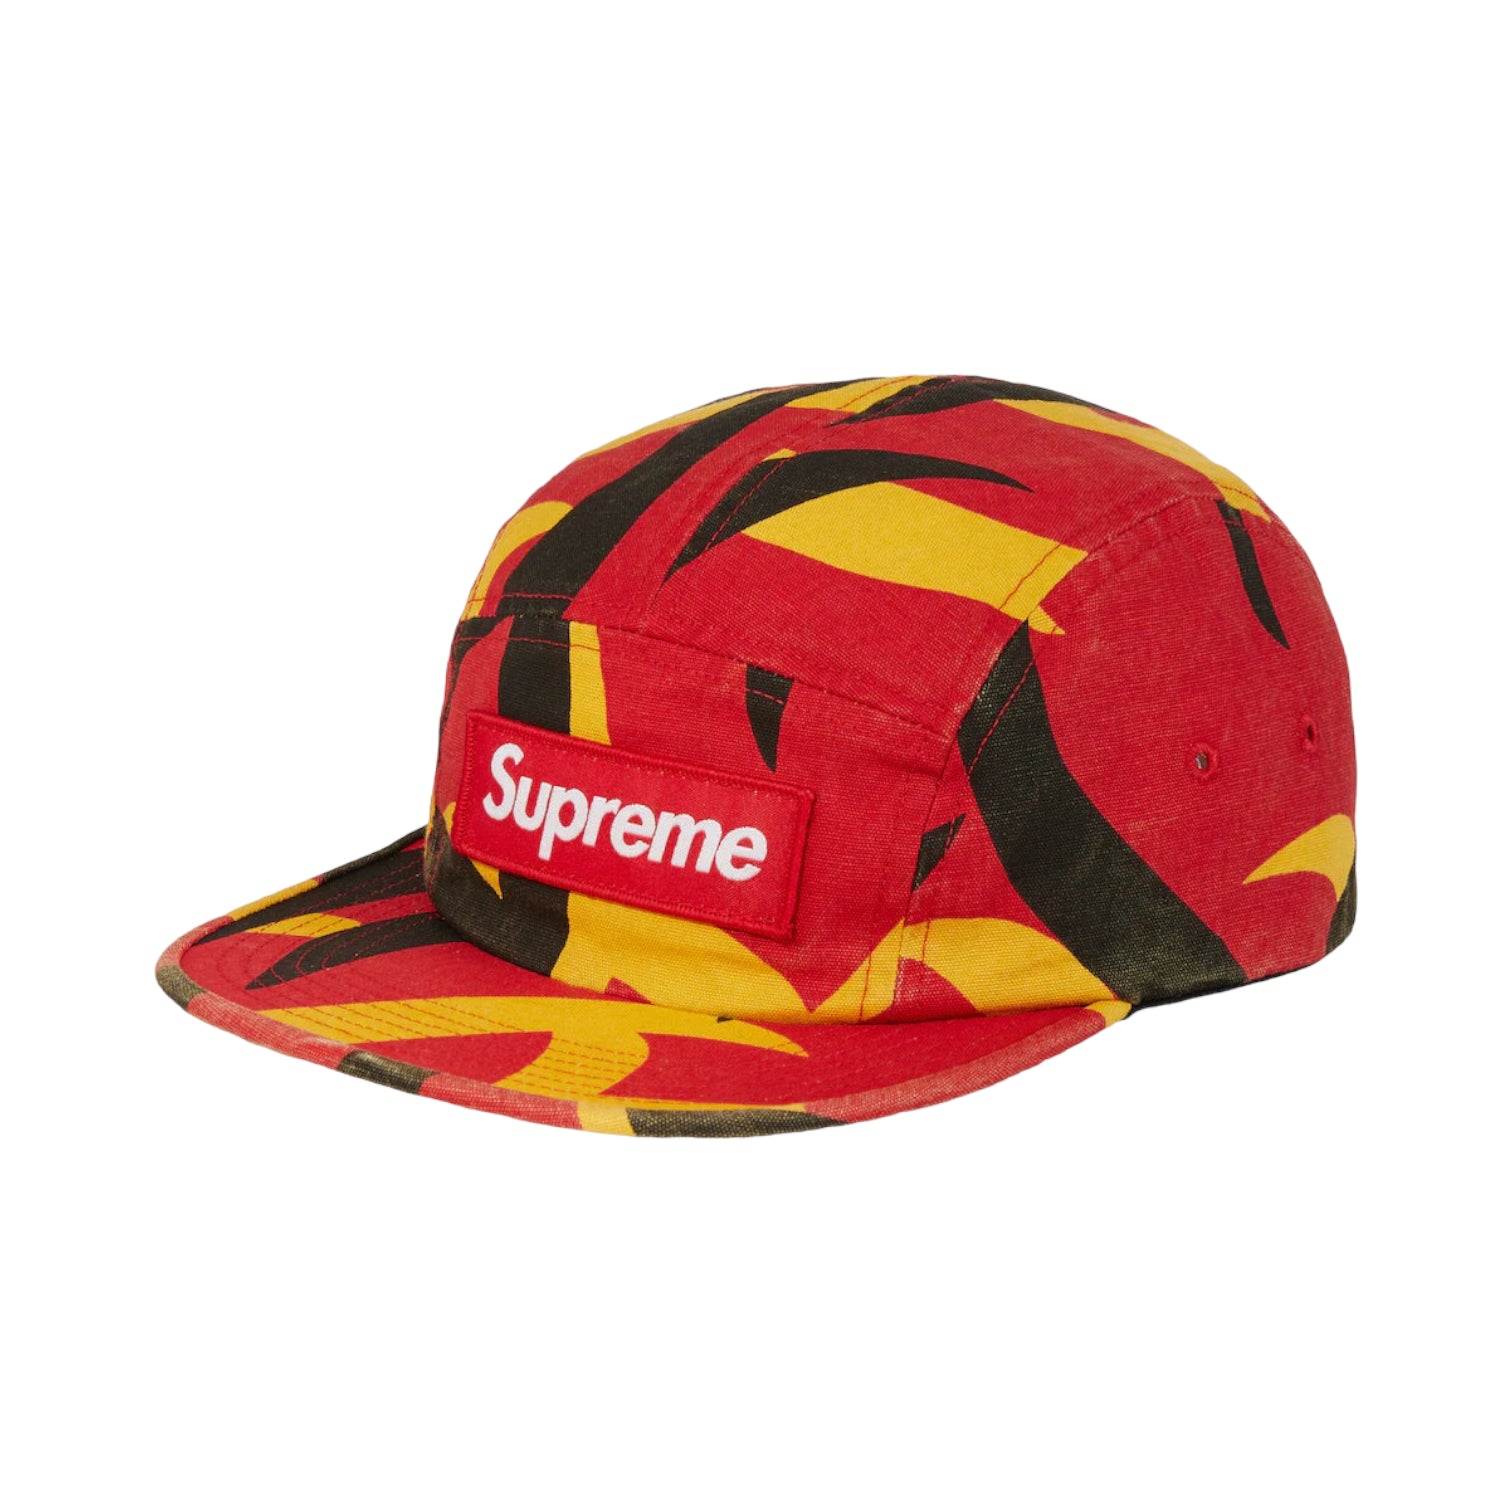 Supreme military camp cap (red tribal camo) FW19 – YEG EXOTIC